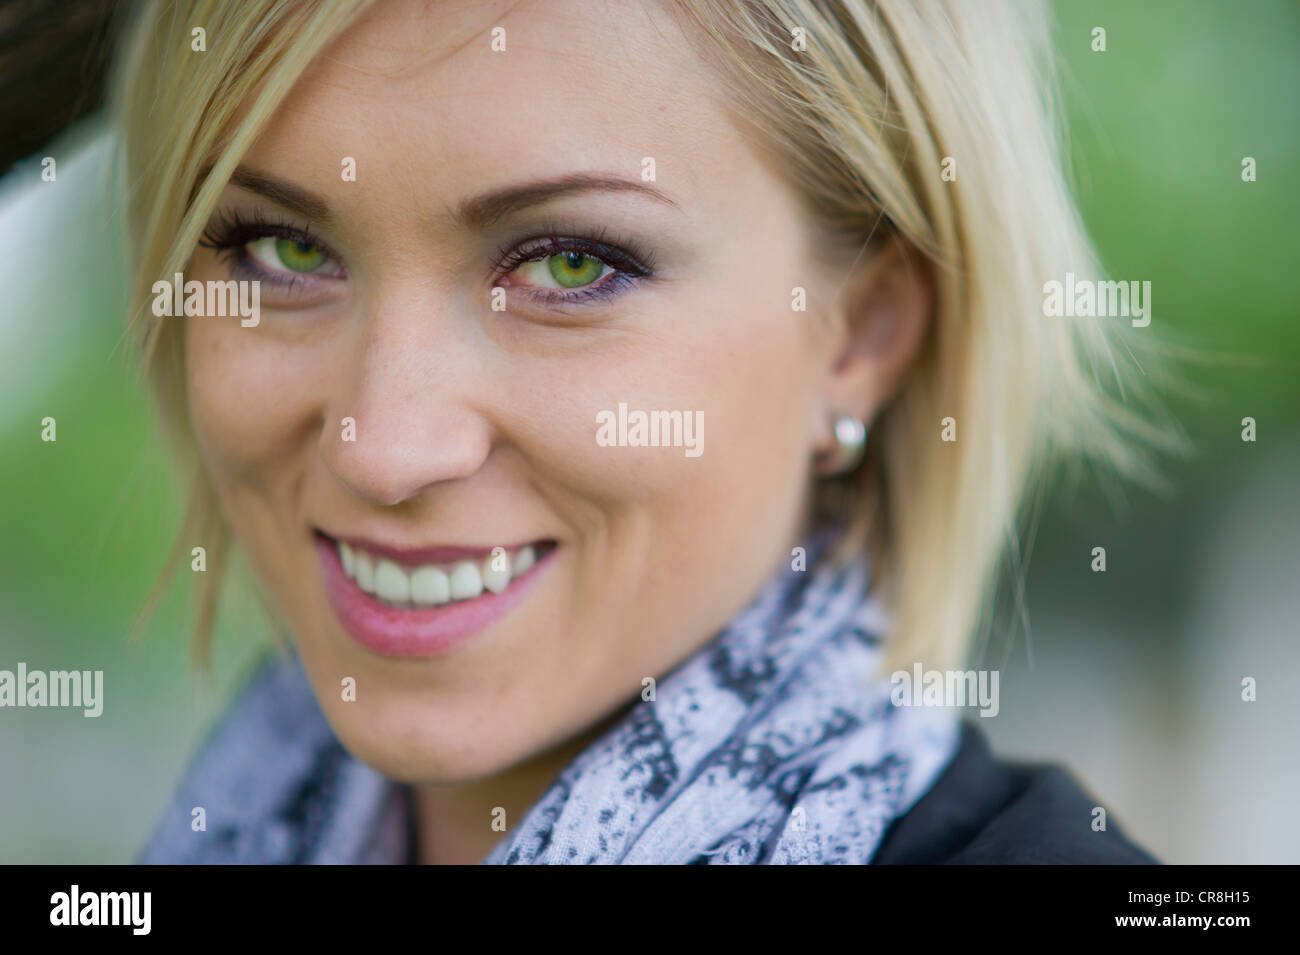 Blonde woman with green eyes Stock Photo